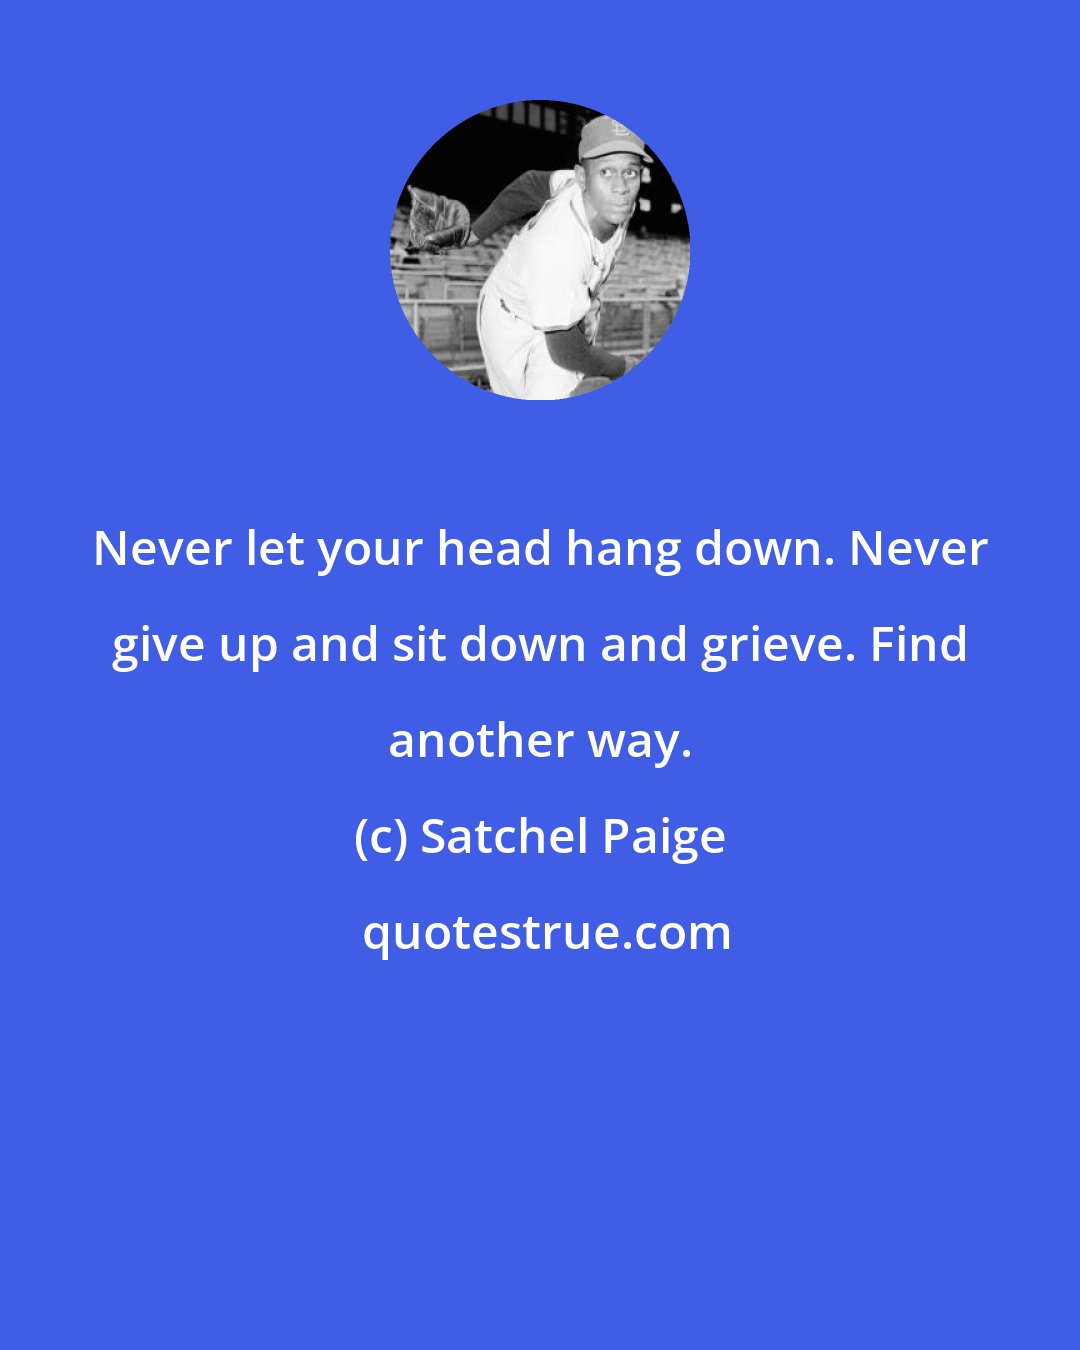 Satchel Paige: Never let your head hang down. Never give up and sit down and grieve. Find another way.